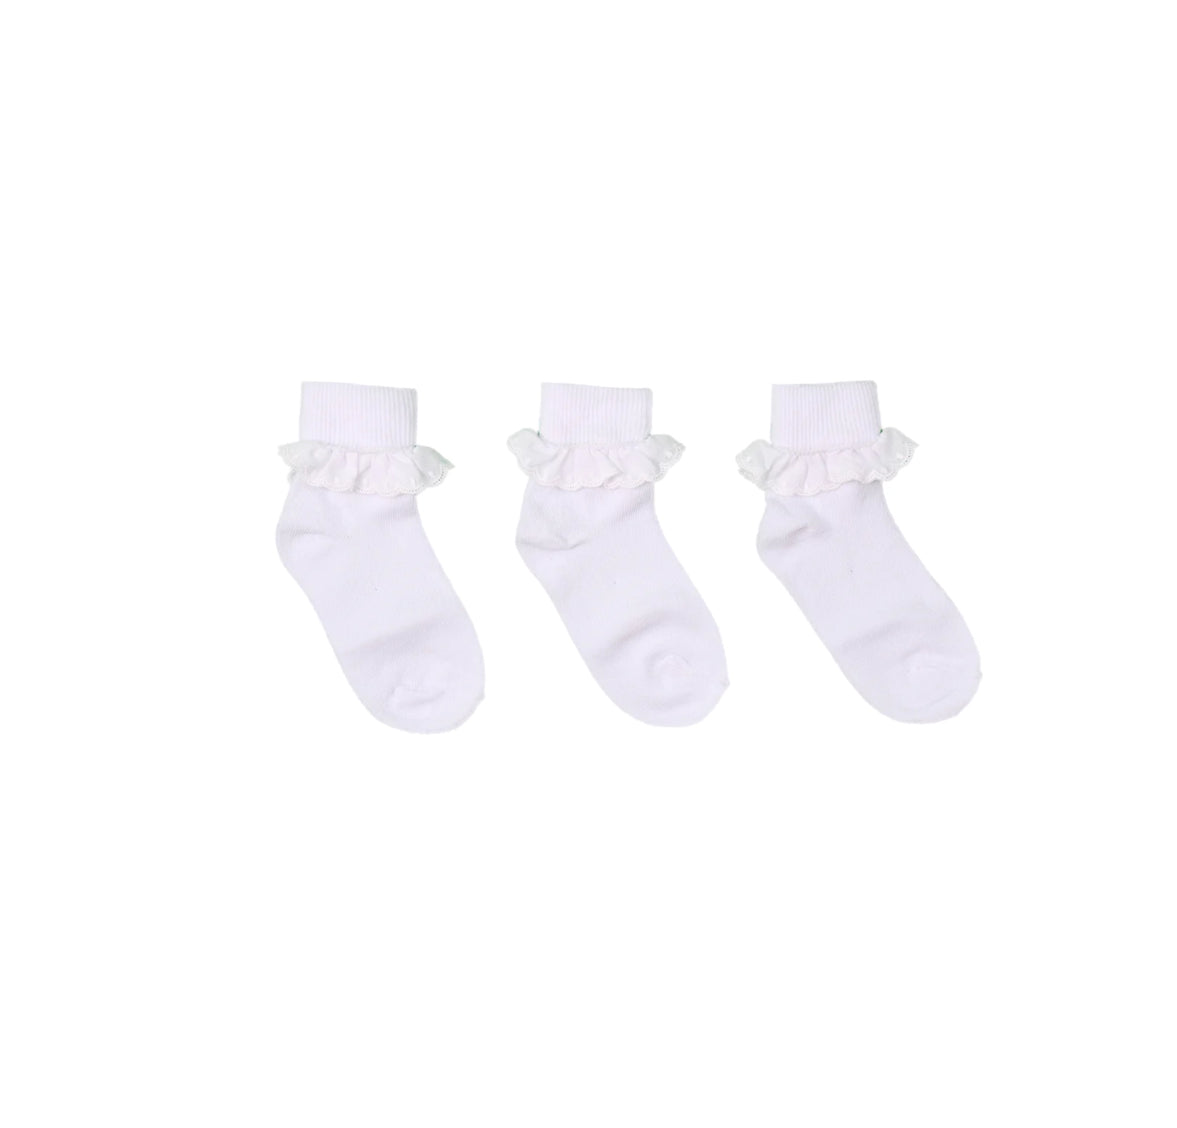 SALE White Cotton Socks PEX Sophie Broderie Anglaise Lace Trim Pack of 3